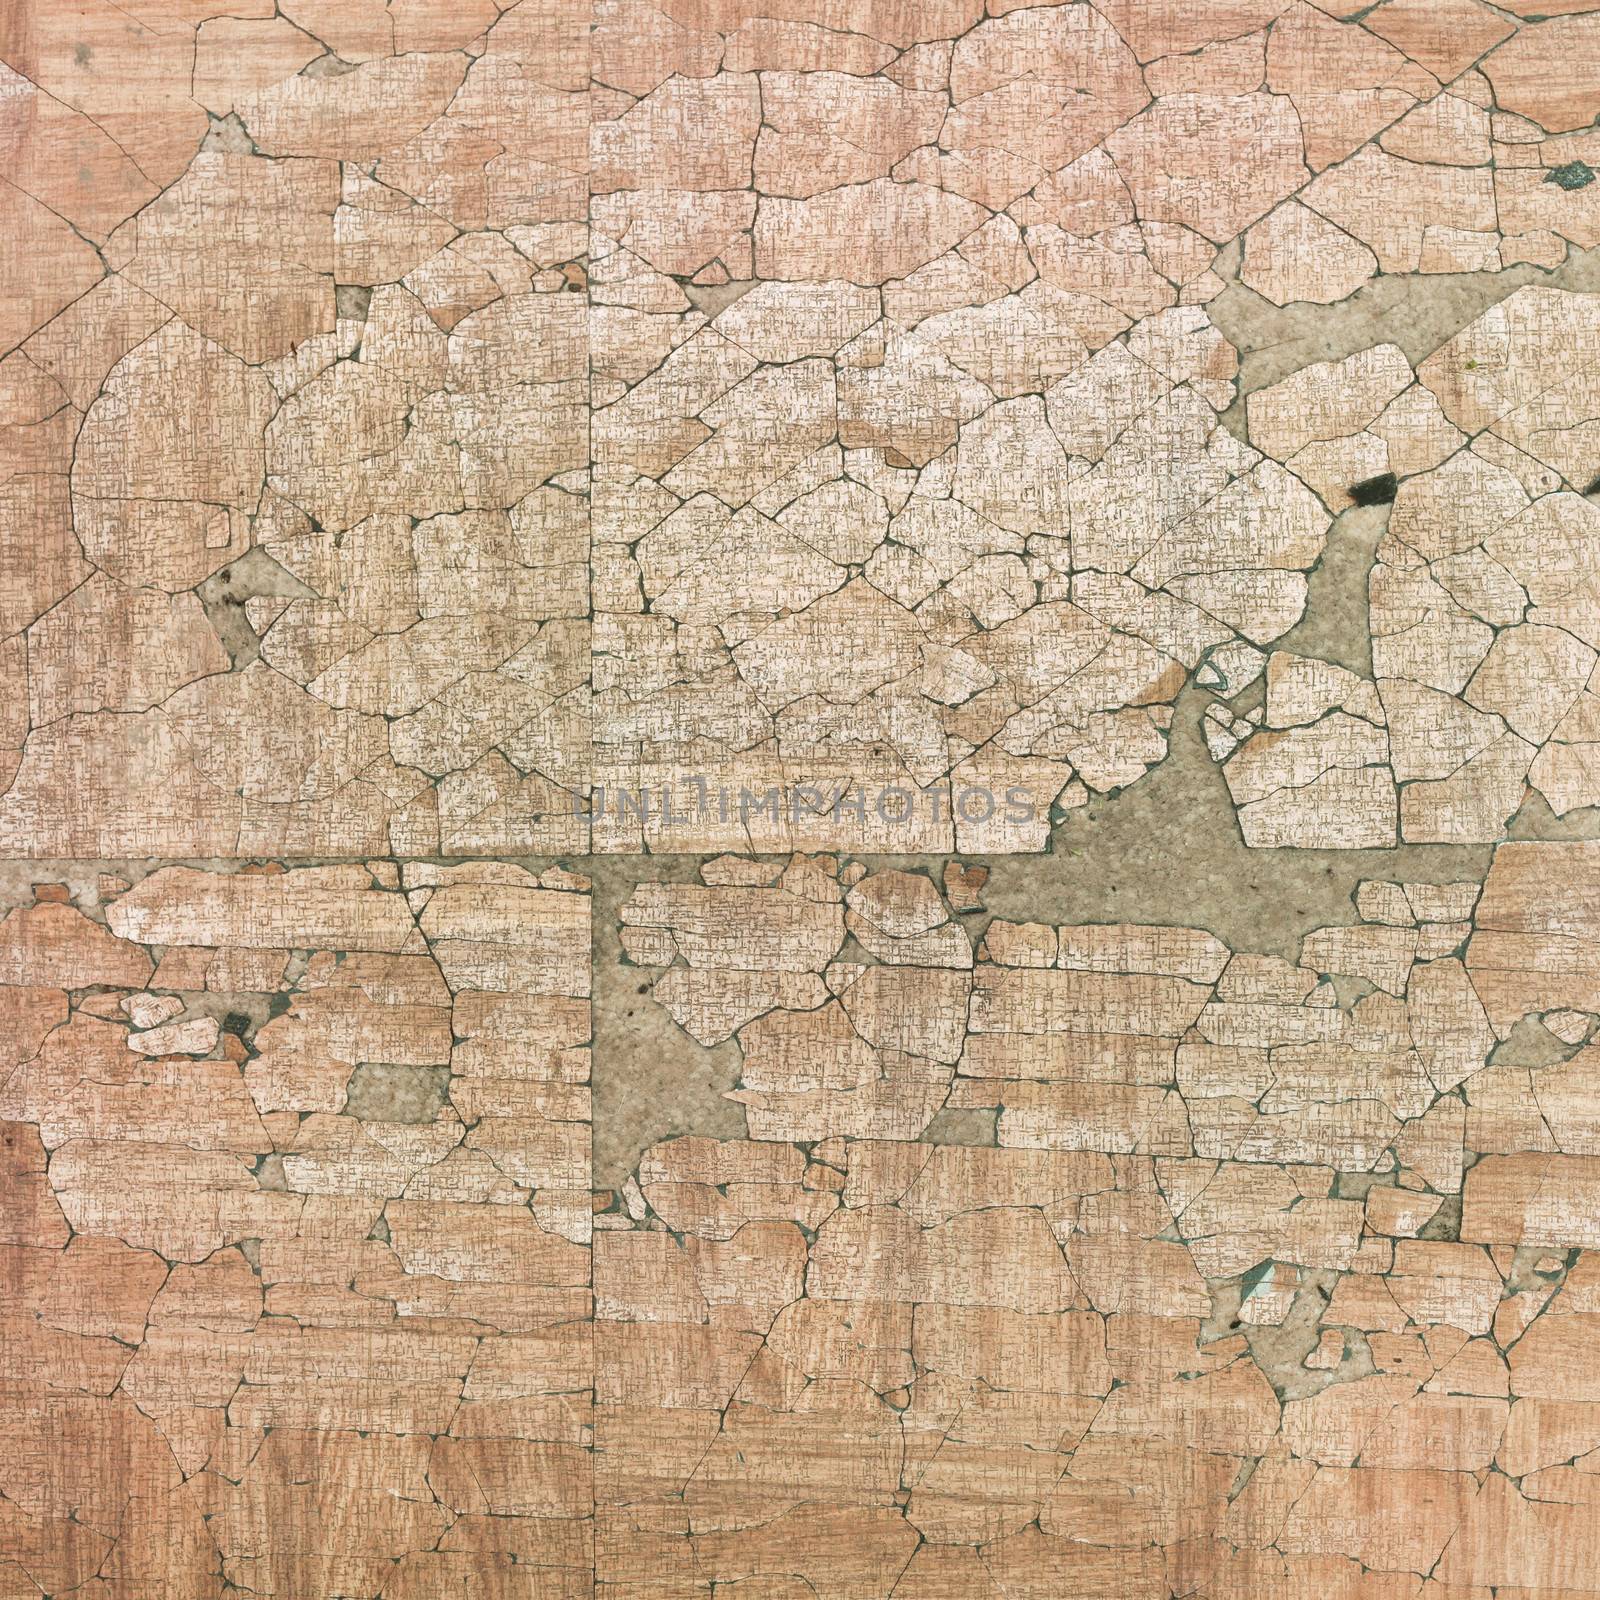 Chipped wooden veneer flooring as a background image